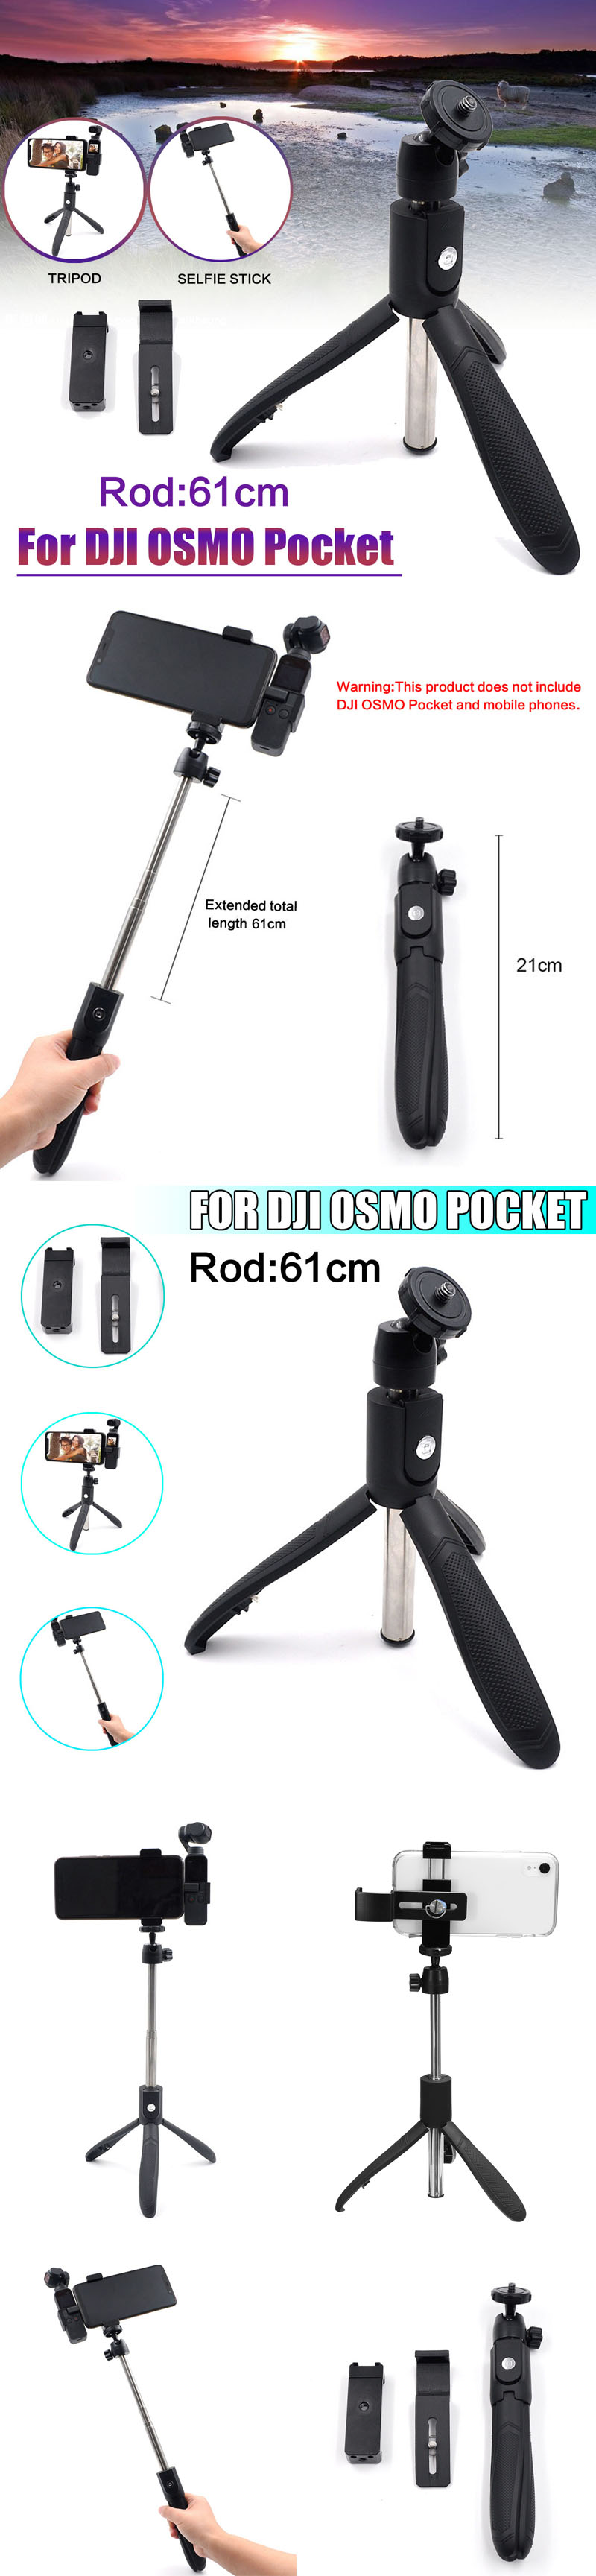 3Pcs-Bracket-Extended-Fixing-Bracke-Selfie-Stick-Phone-Holder-Camping-Hunting-Accessories-Camera-Mou-1423743